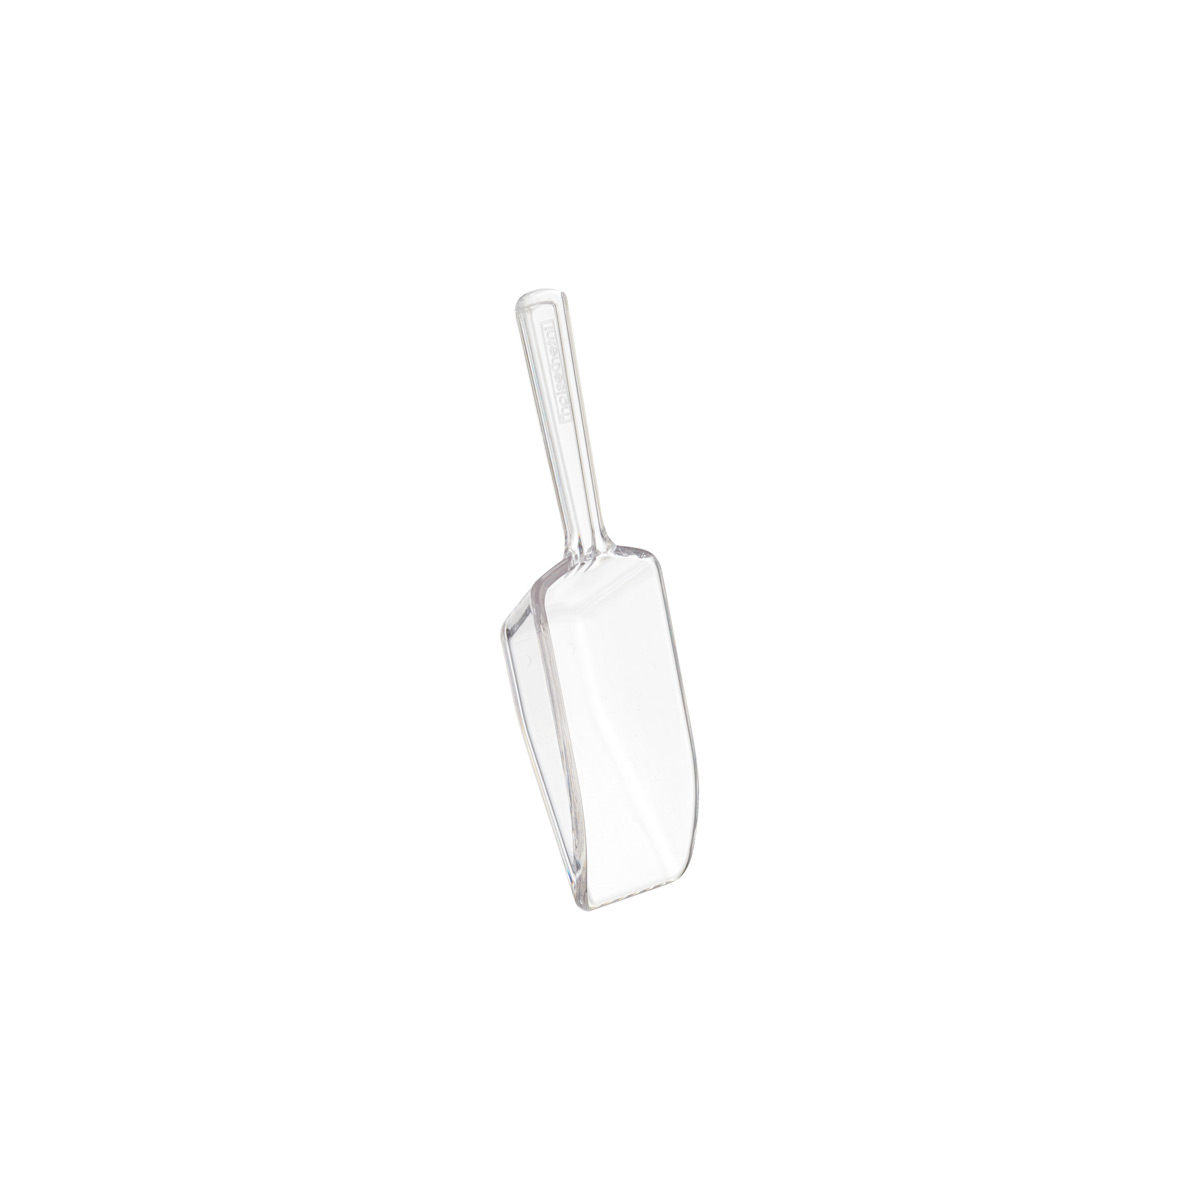 https://www.containerstore.com/catalogimages/305080/428901-scoop-clear-plastic-.7oz_1200.jpg